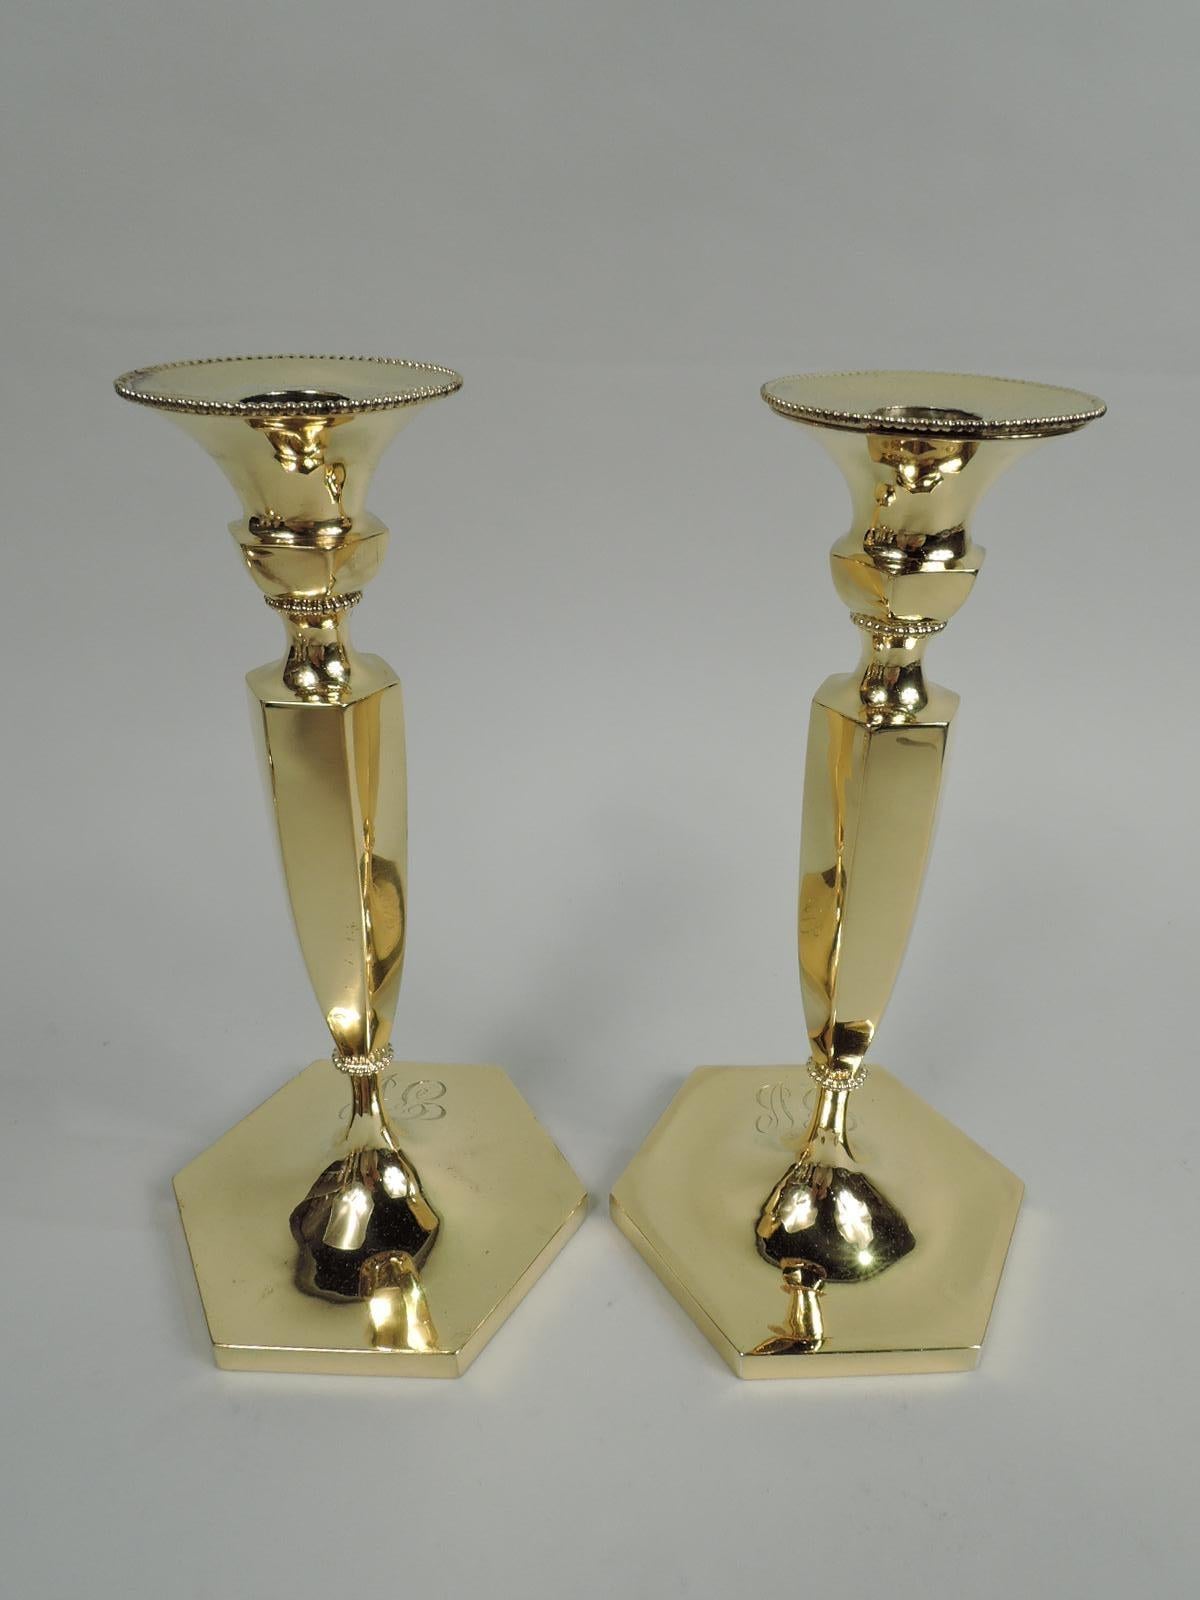 American Set of 4 Antique Gilt Sterling Silver Candlesticks by New York Maker